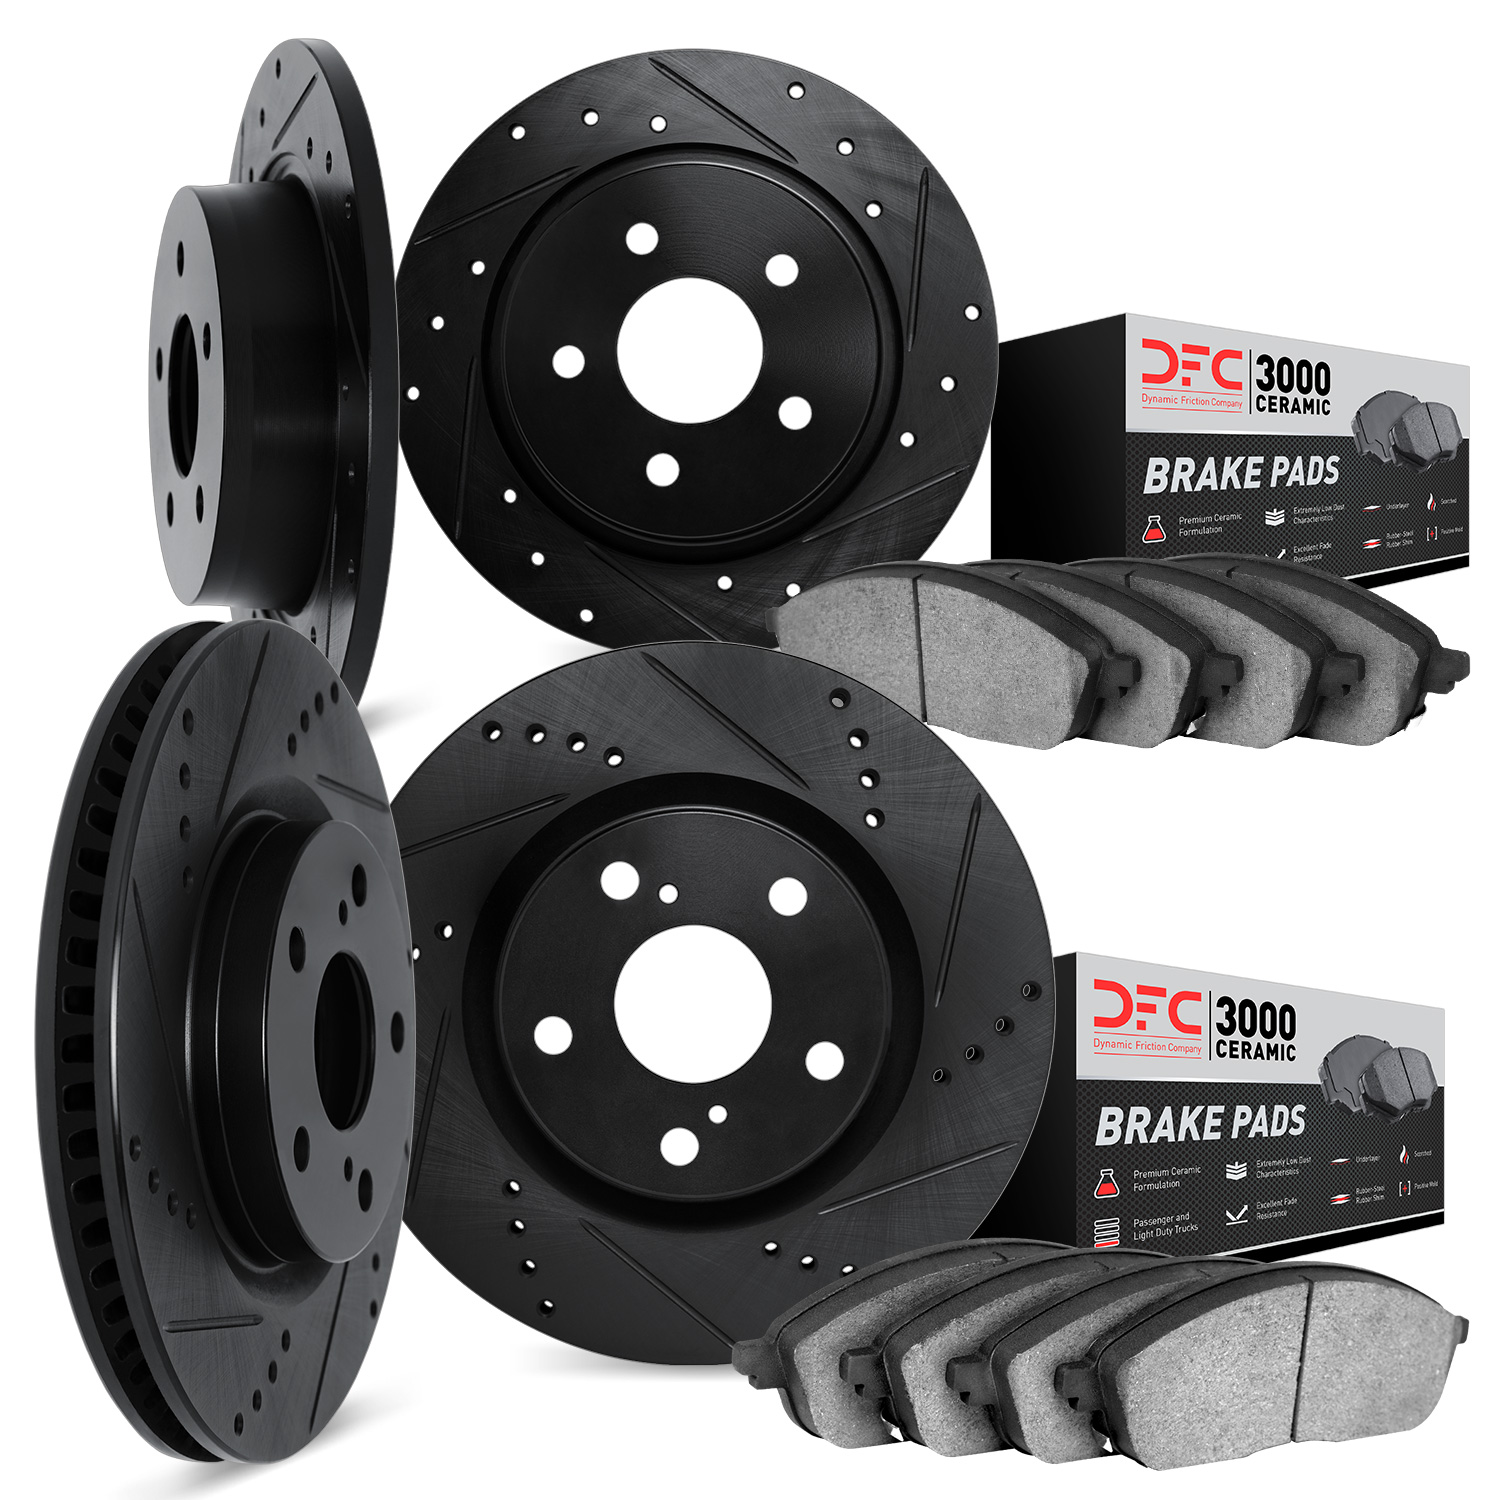 8304-58015 Drilled/Slotted Brake Rotors with 3000-Series Ceramic Brake Pads Kit [Black], 2014-2020 Acura/Honda, Position: Front